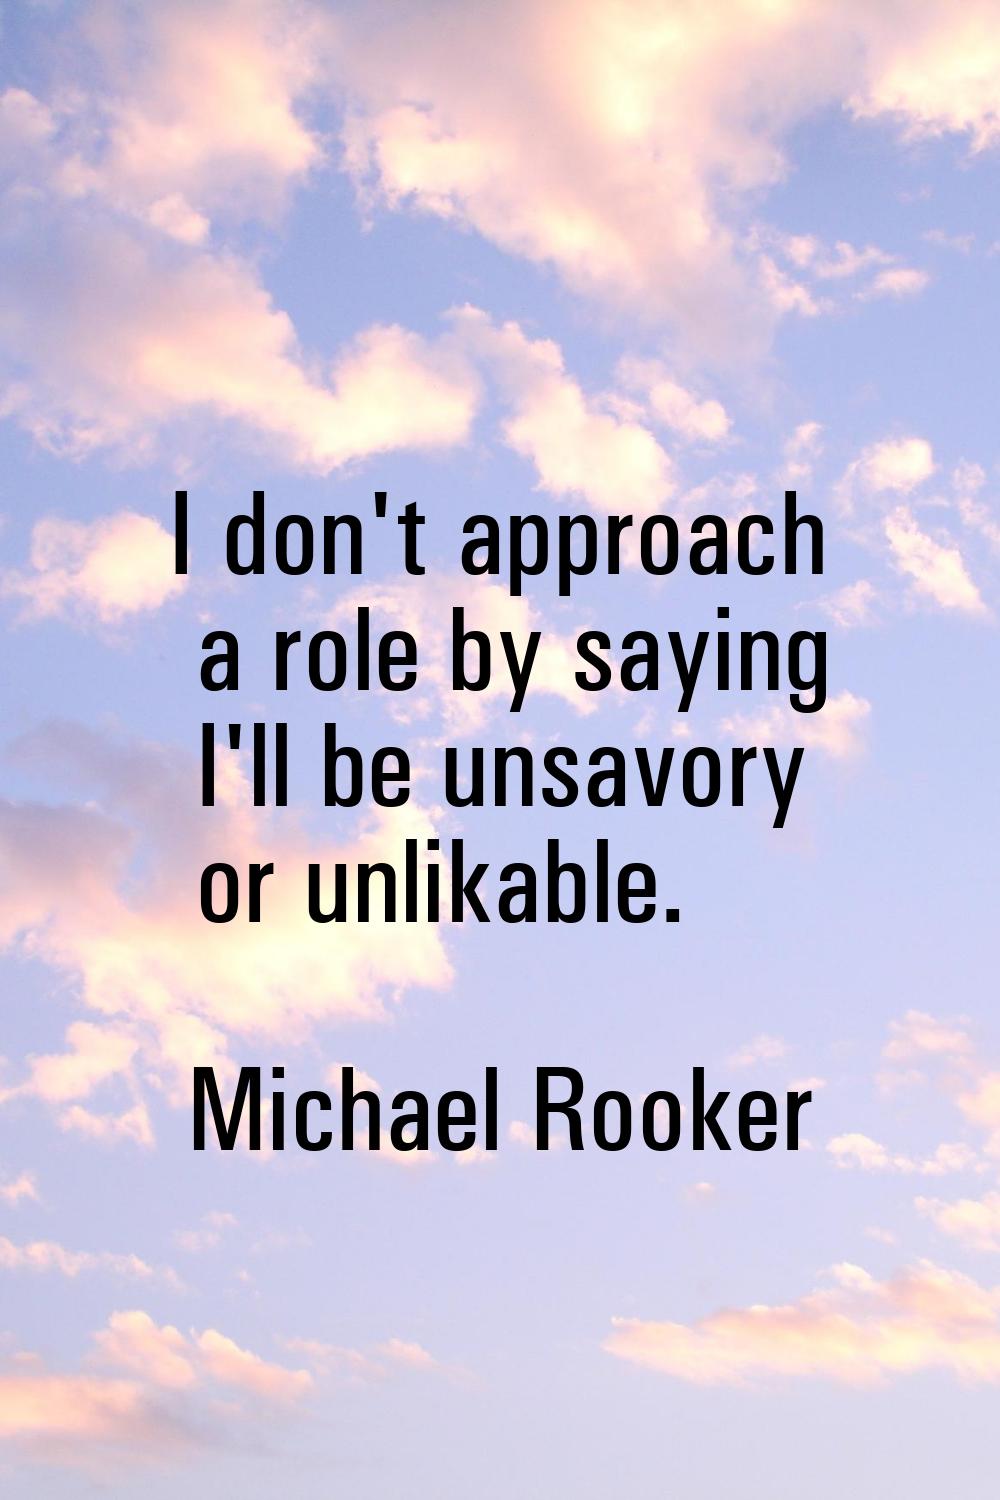 I don't approach a role by saying I'll be unsavory or unlikable.